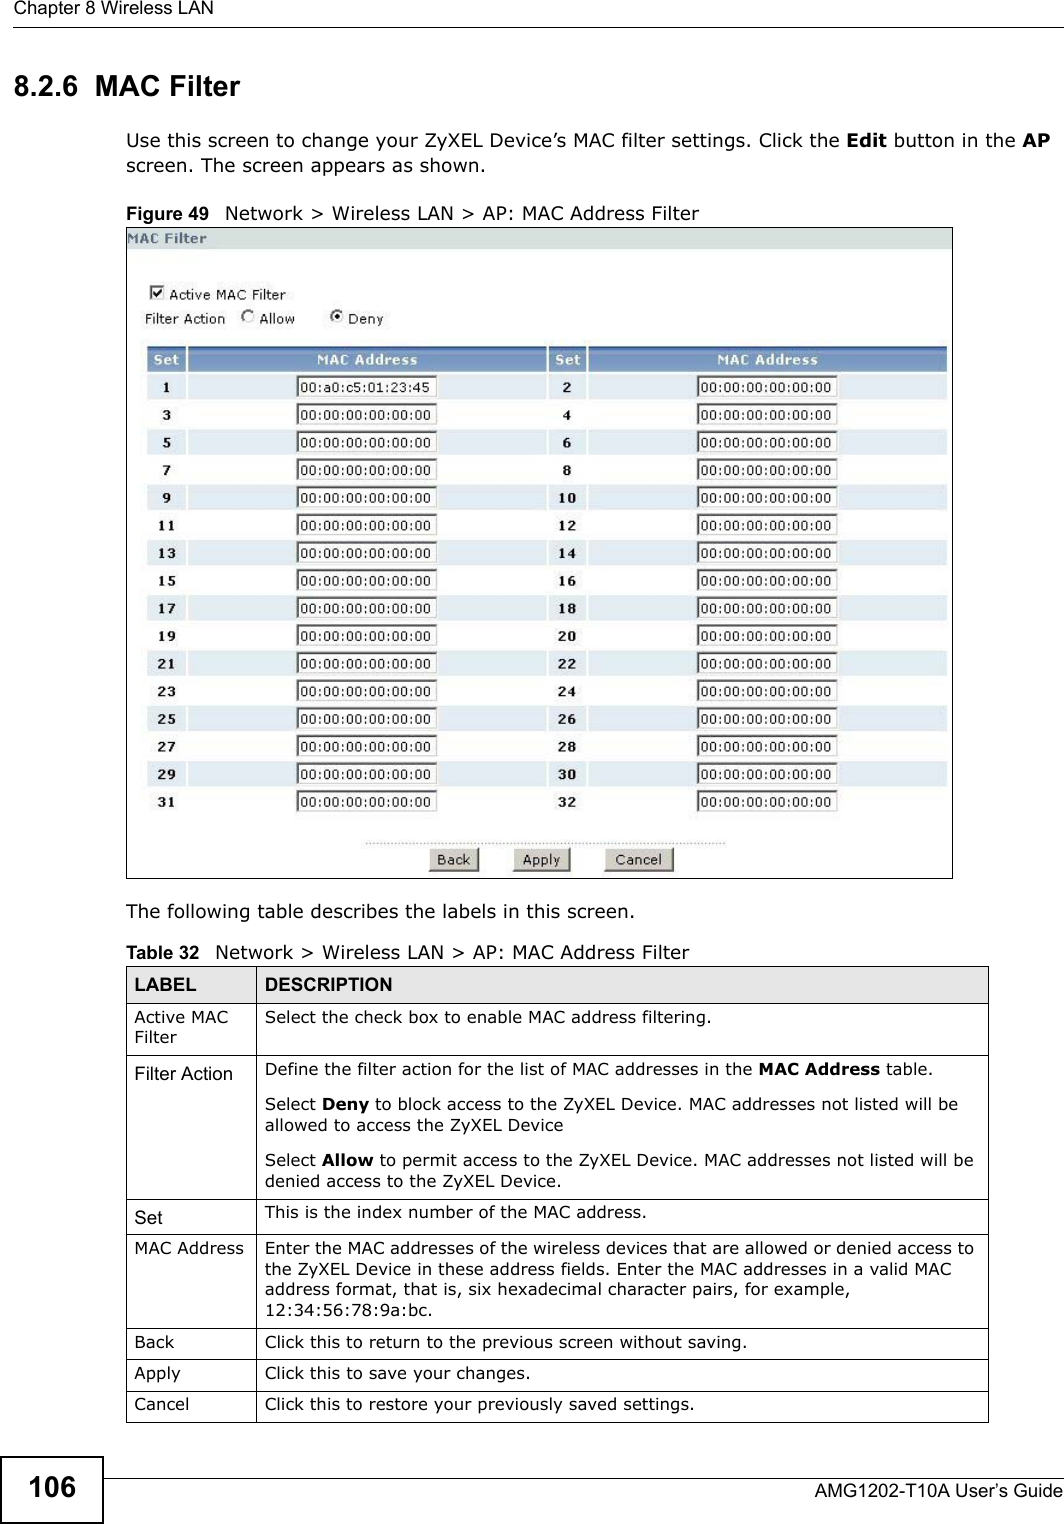 Chapter 8 Wireless LANAMG1202-T10A User’s Guide1068.2.6  MAC Filter    Use this screen to change your ZyXEL Device’s MAC filter settings. Click the Edit button in the AP screen. The screen appears as shown.Figure 49   Network &gt; Wireless LAN &gt; AP: MAC Address FilterThe following table describes the labels in this screen.Table 32   Network &gt; Wireless LAN &gt; AP: MAC Address FilterLABEL DESCRIPTIONActive MAC FilterSelect the check box to enable MAC address filtering.Filter Action  Define the filter action for the list of MAC addresses in the MAC Address table. Select Deny to block access to the ZyXEL Device. MAC addresses not listed will be allowed to access the ZyXEL Device Select Allow to permit access to the ZyXEL Device. MAC addresses not listed will be denied access to the ZyXEL Device. Set This is the index number of the MAC address.MAC Address Enter the MAC addresses of the wireless devices that are allowed or denied access to the ZyXEL Device in these address fields. Enter the MAC addresses in a valid MAC address format, that is, six hexadecimal character pairs, for example, 12:34:56:78:9a:bc.Back Click this to return to the previous screen without saving.Apply Click this to save your changes.Cancel Click this to restore your previously saved settings.